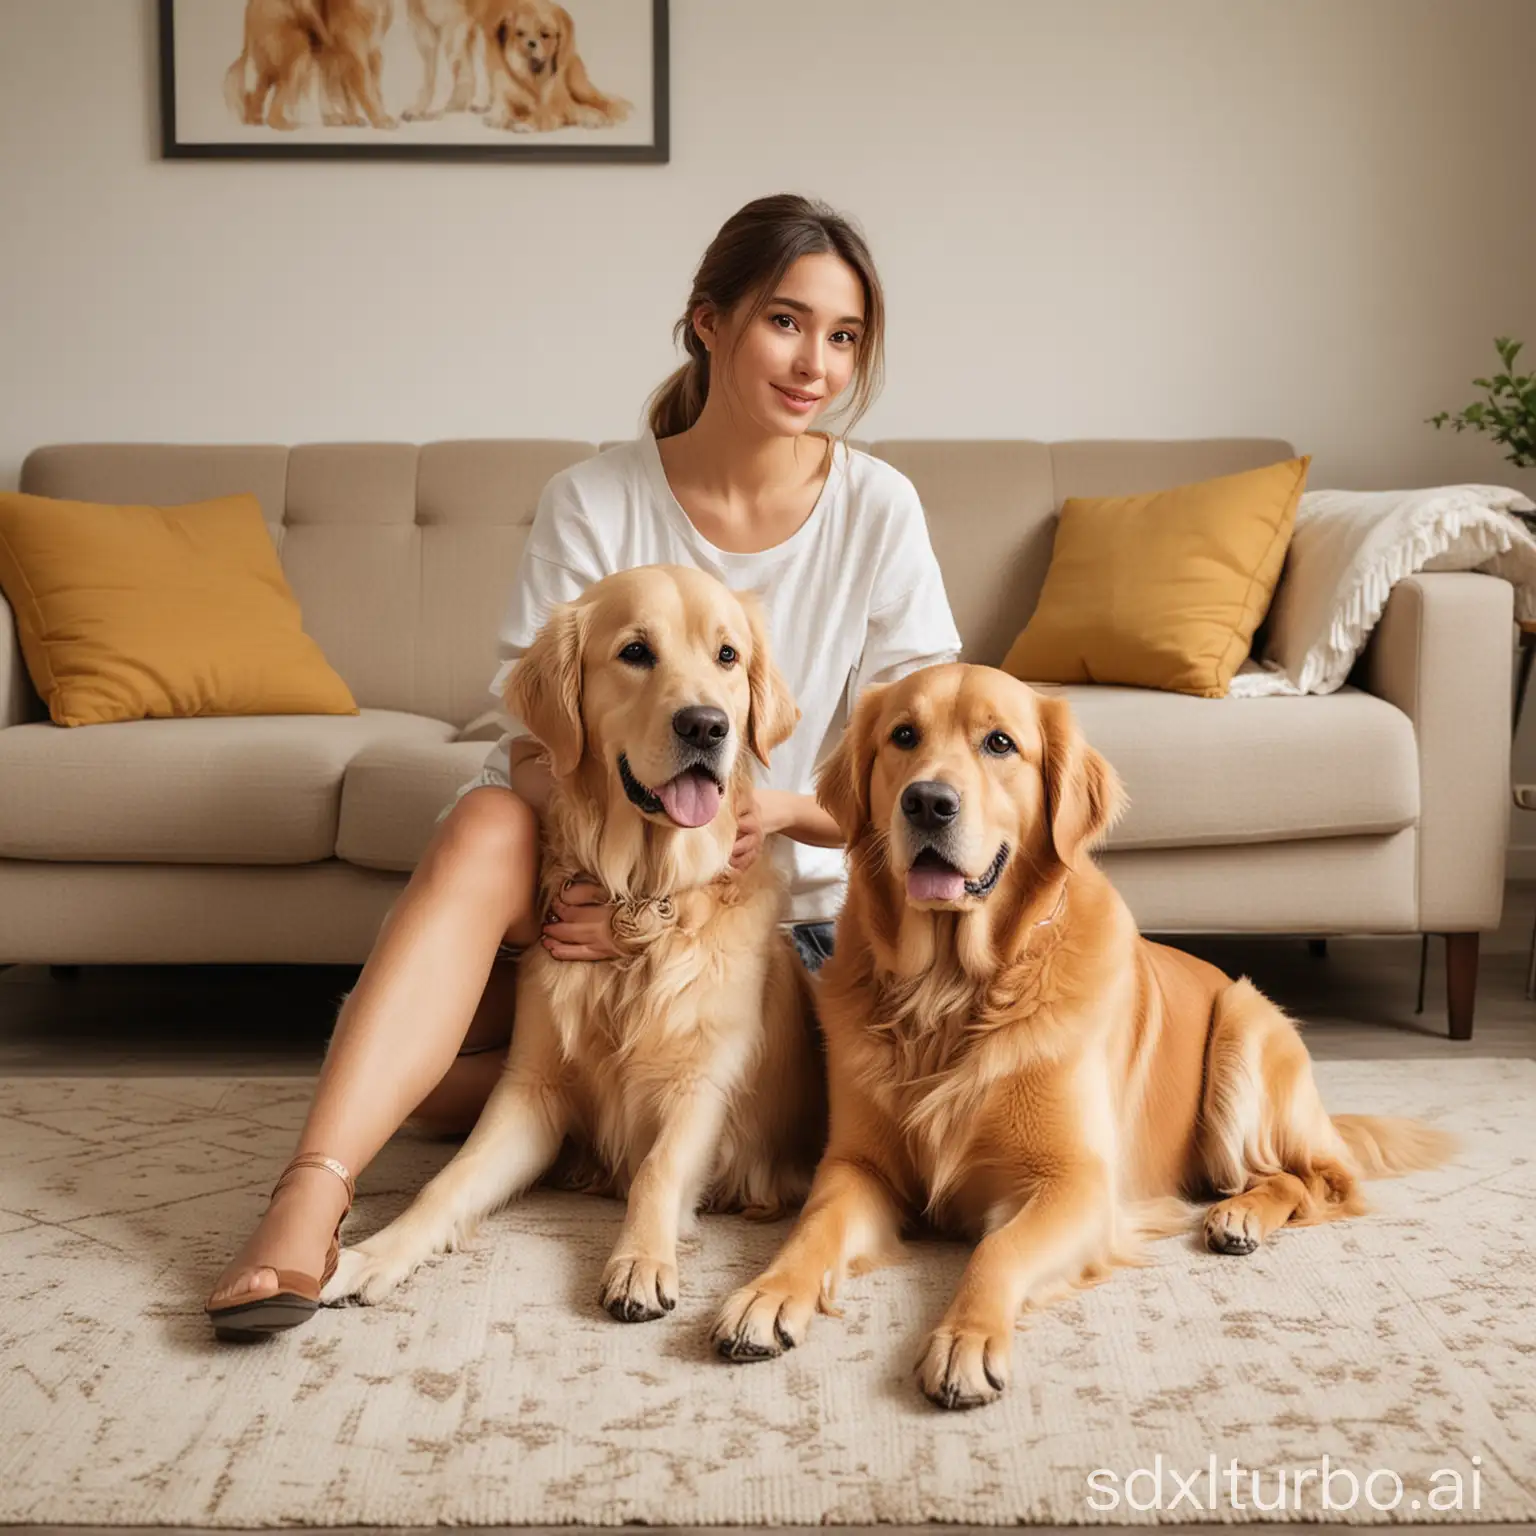 a beautiful foreign adult female holding a golden retriever sitting on the carpet in the living room, simple background scene, realistic character, real dog, clear picture